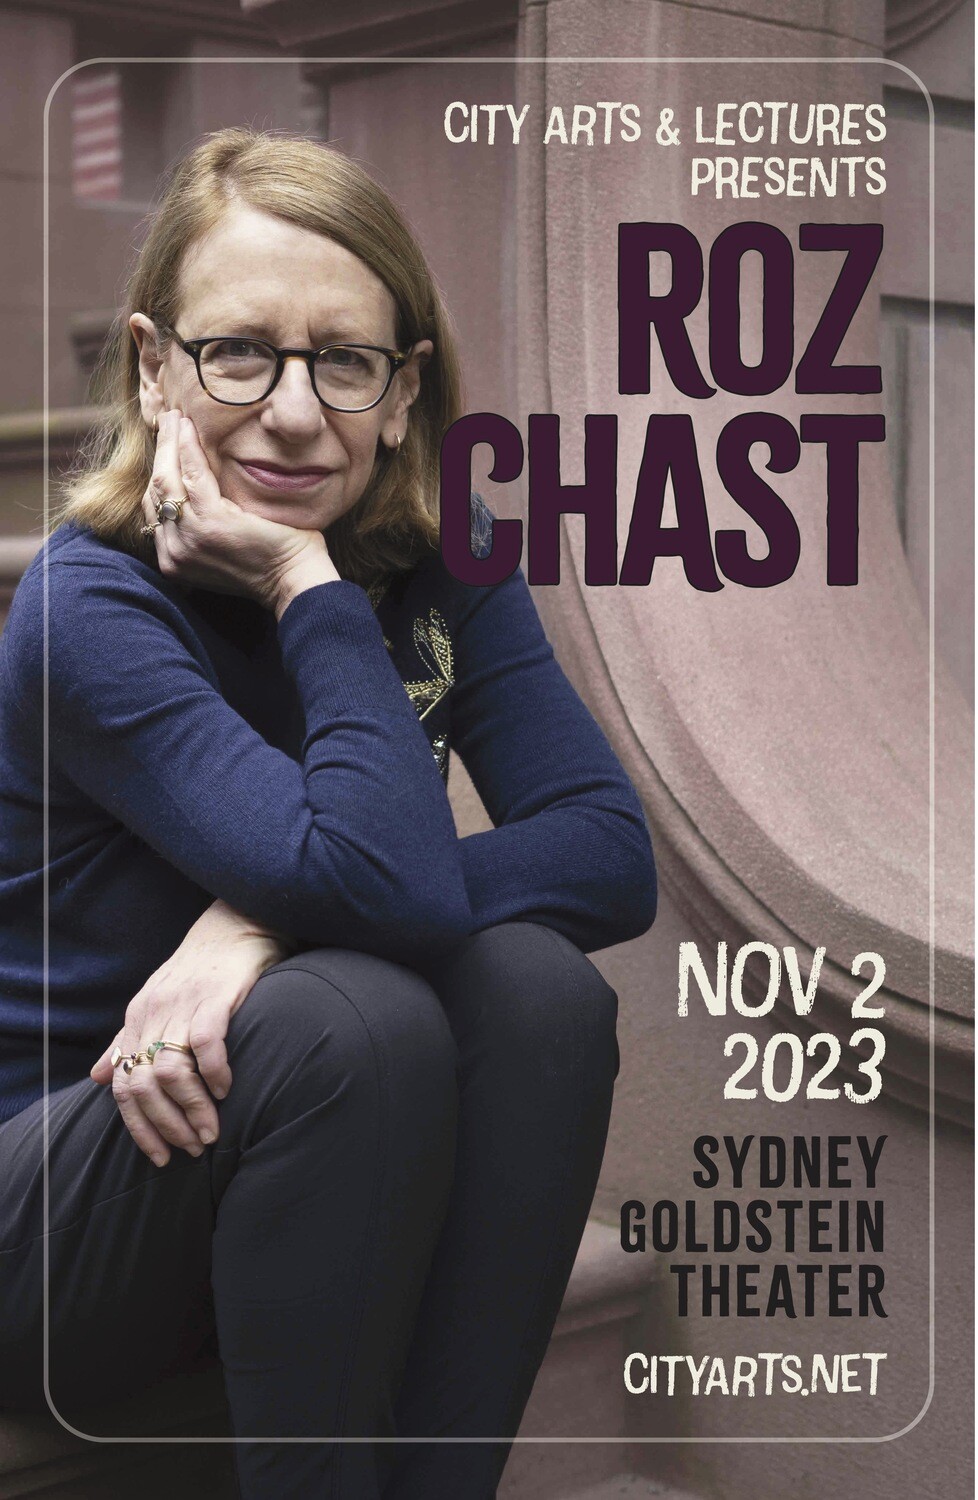 Roz Chast - 2023 Event Poster